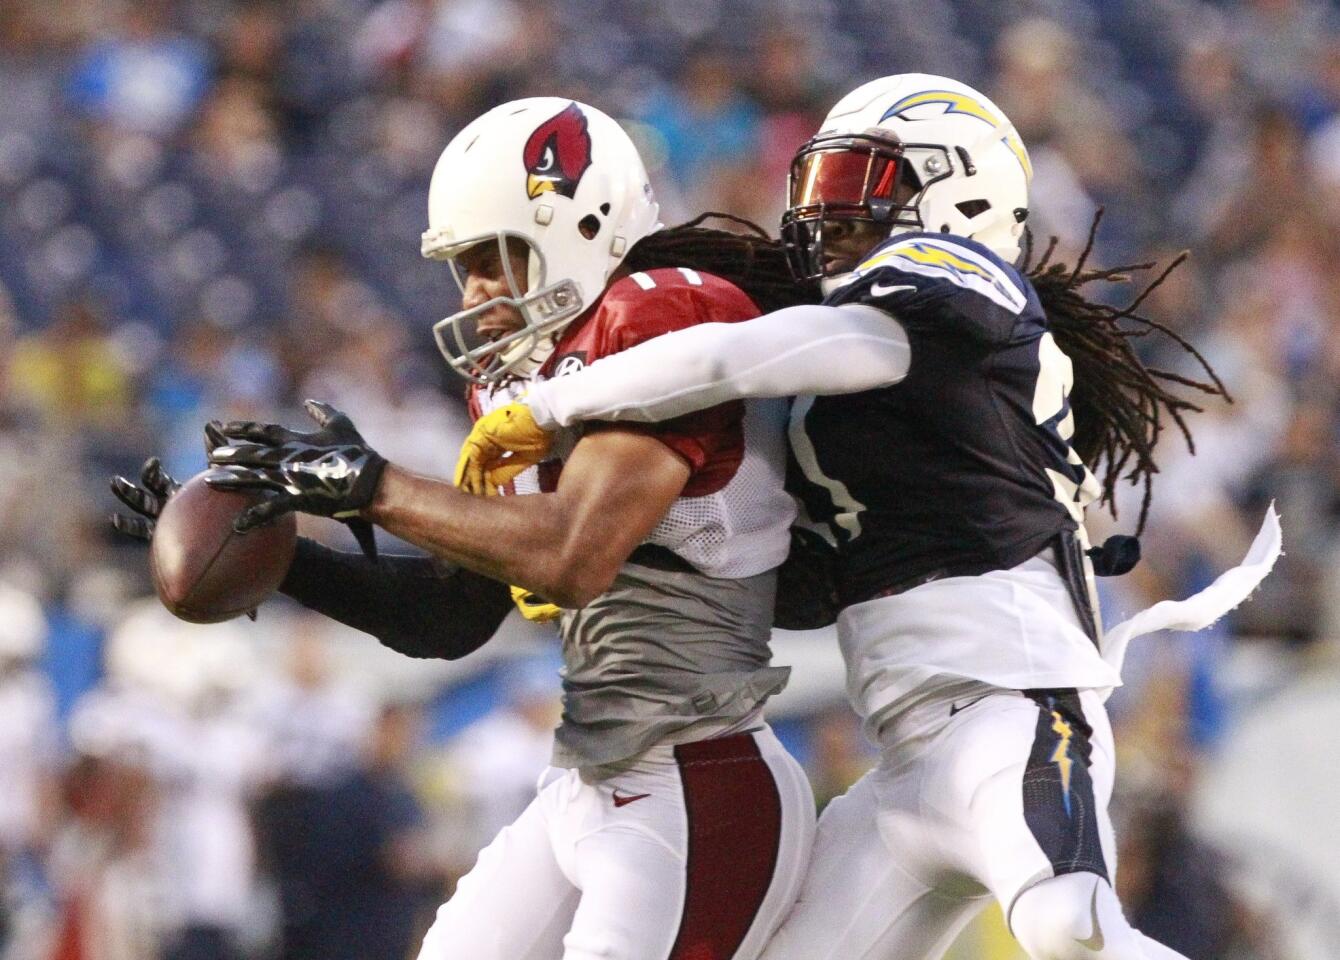 The Chargers' Jahleel Addae, right, breaks up a pass intended for the Cardinals' Larry Fitzgerald.